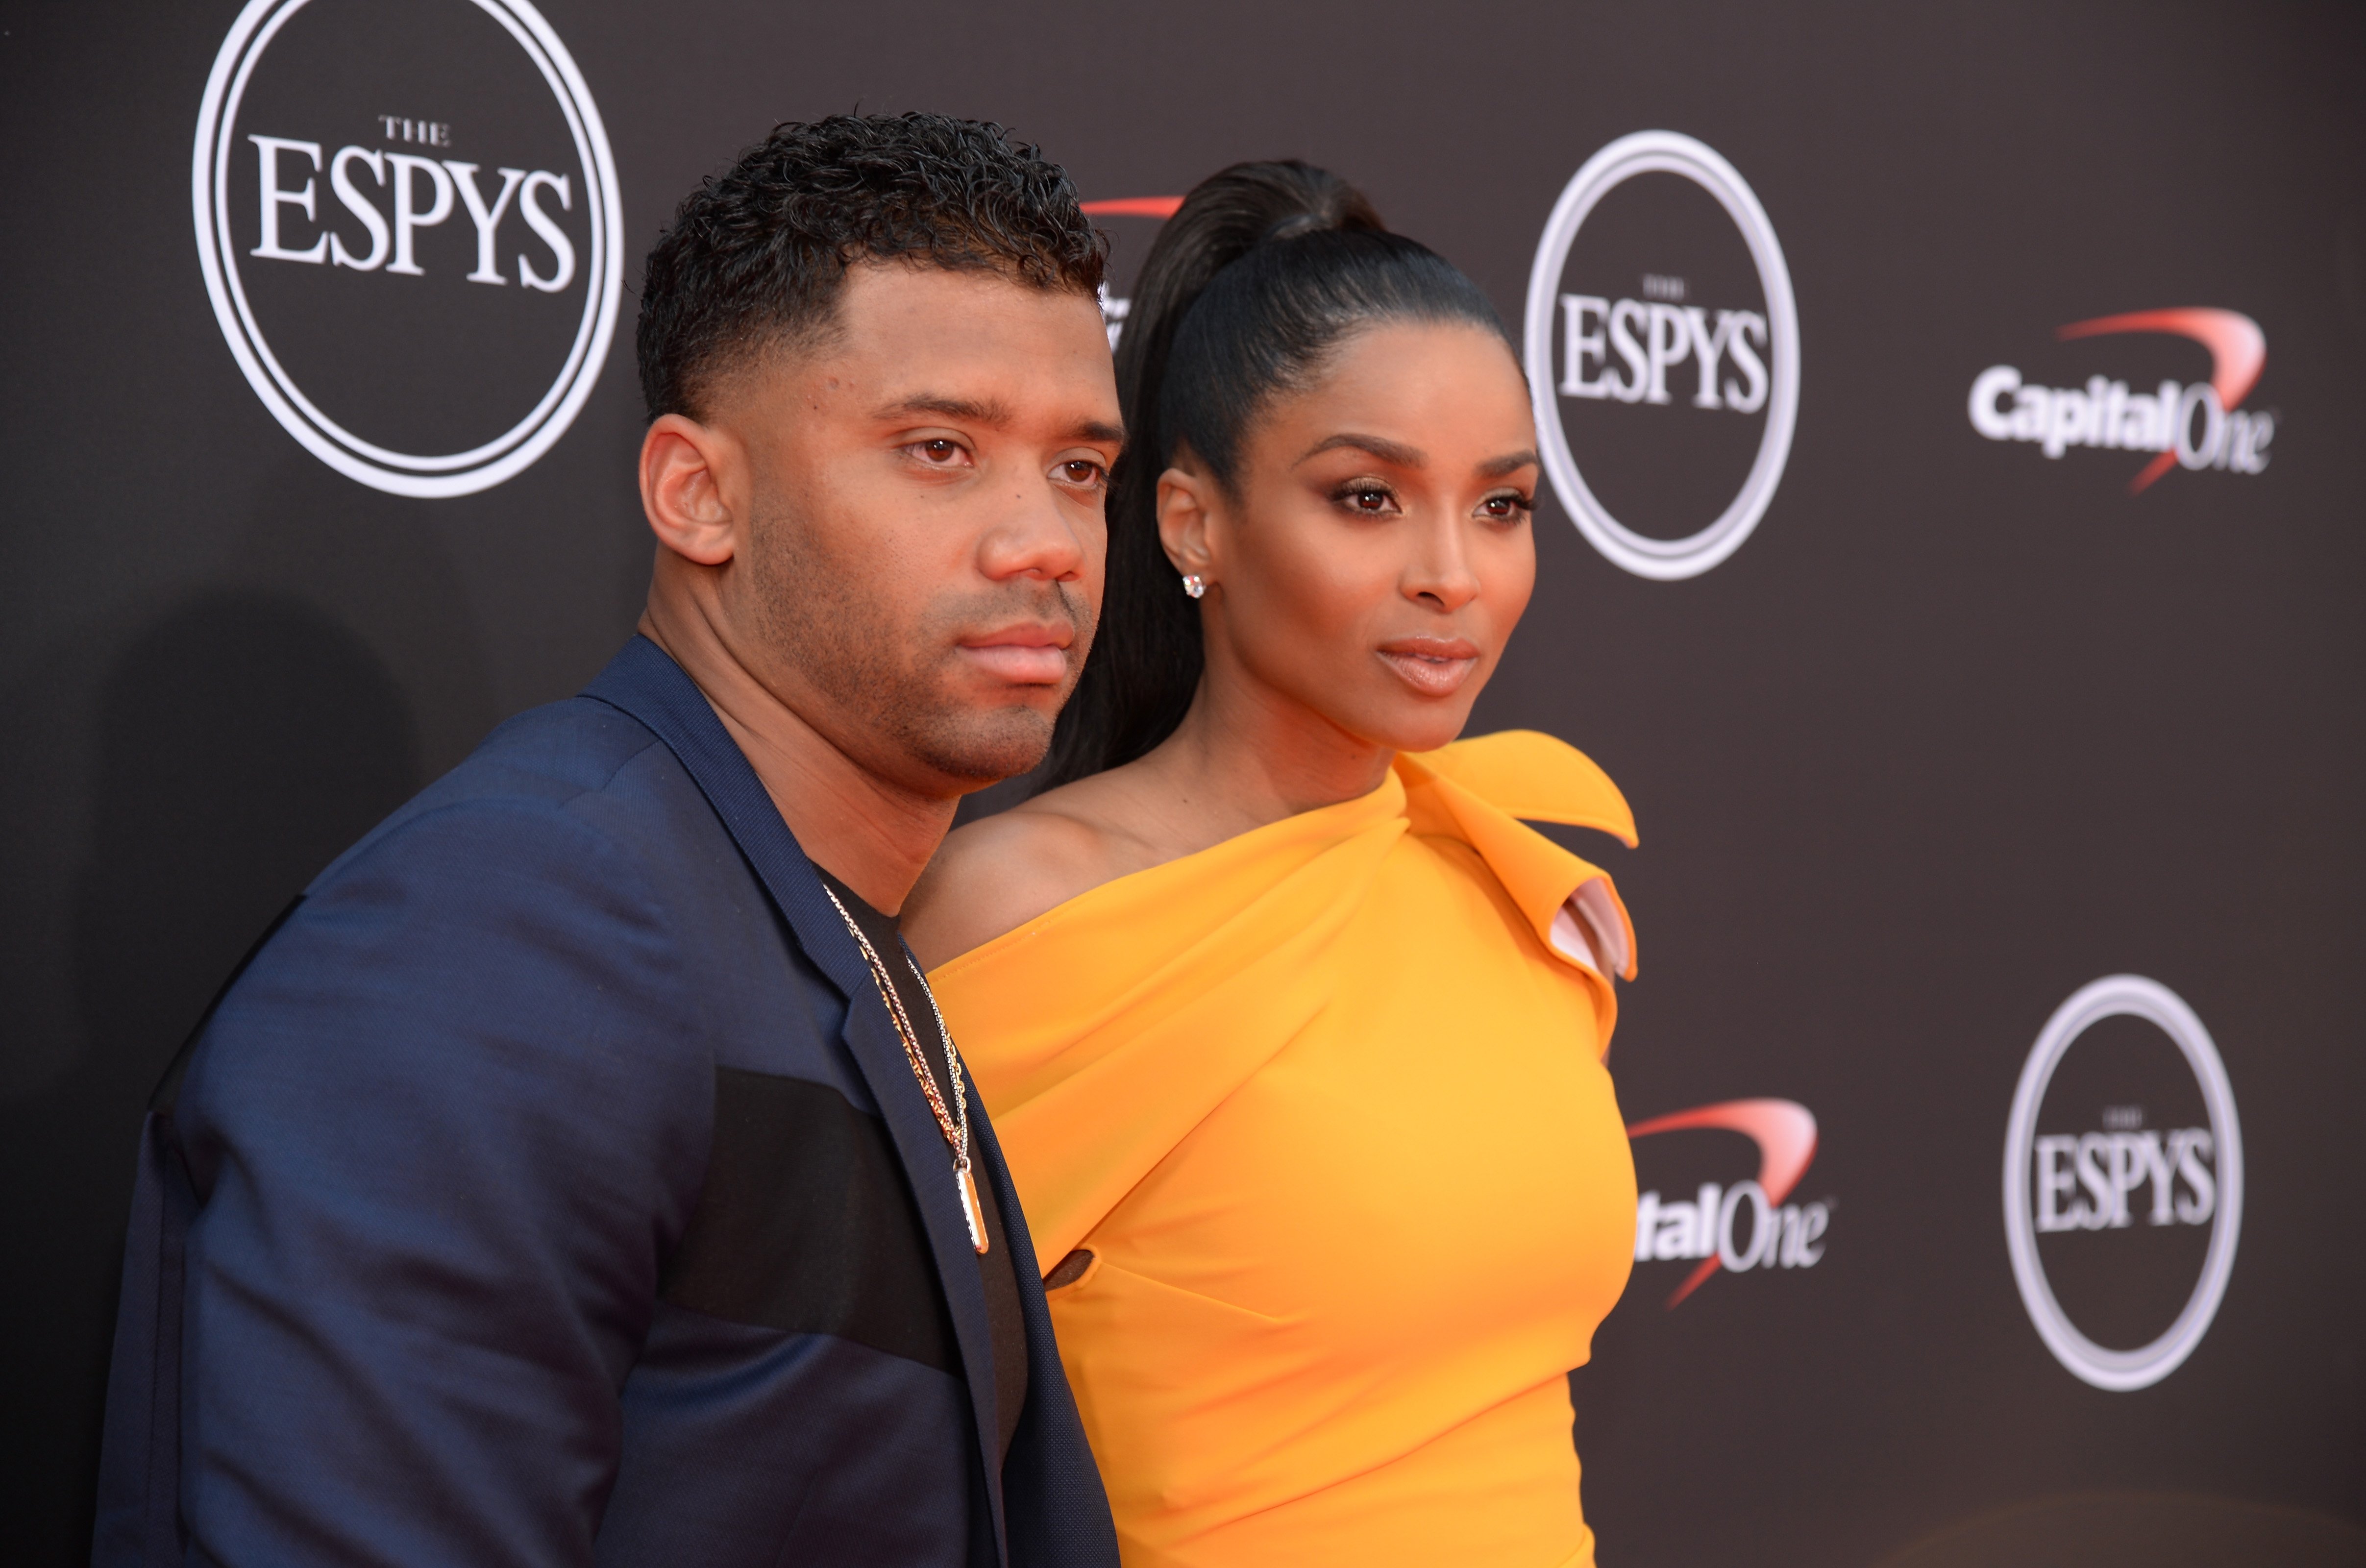  Ciara and Russell Wilson at the 2018 ESPY Awards red carpet live show on July 18, 2018 in Los Angeles, California.| Source: Getty Images